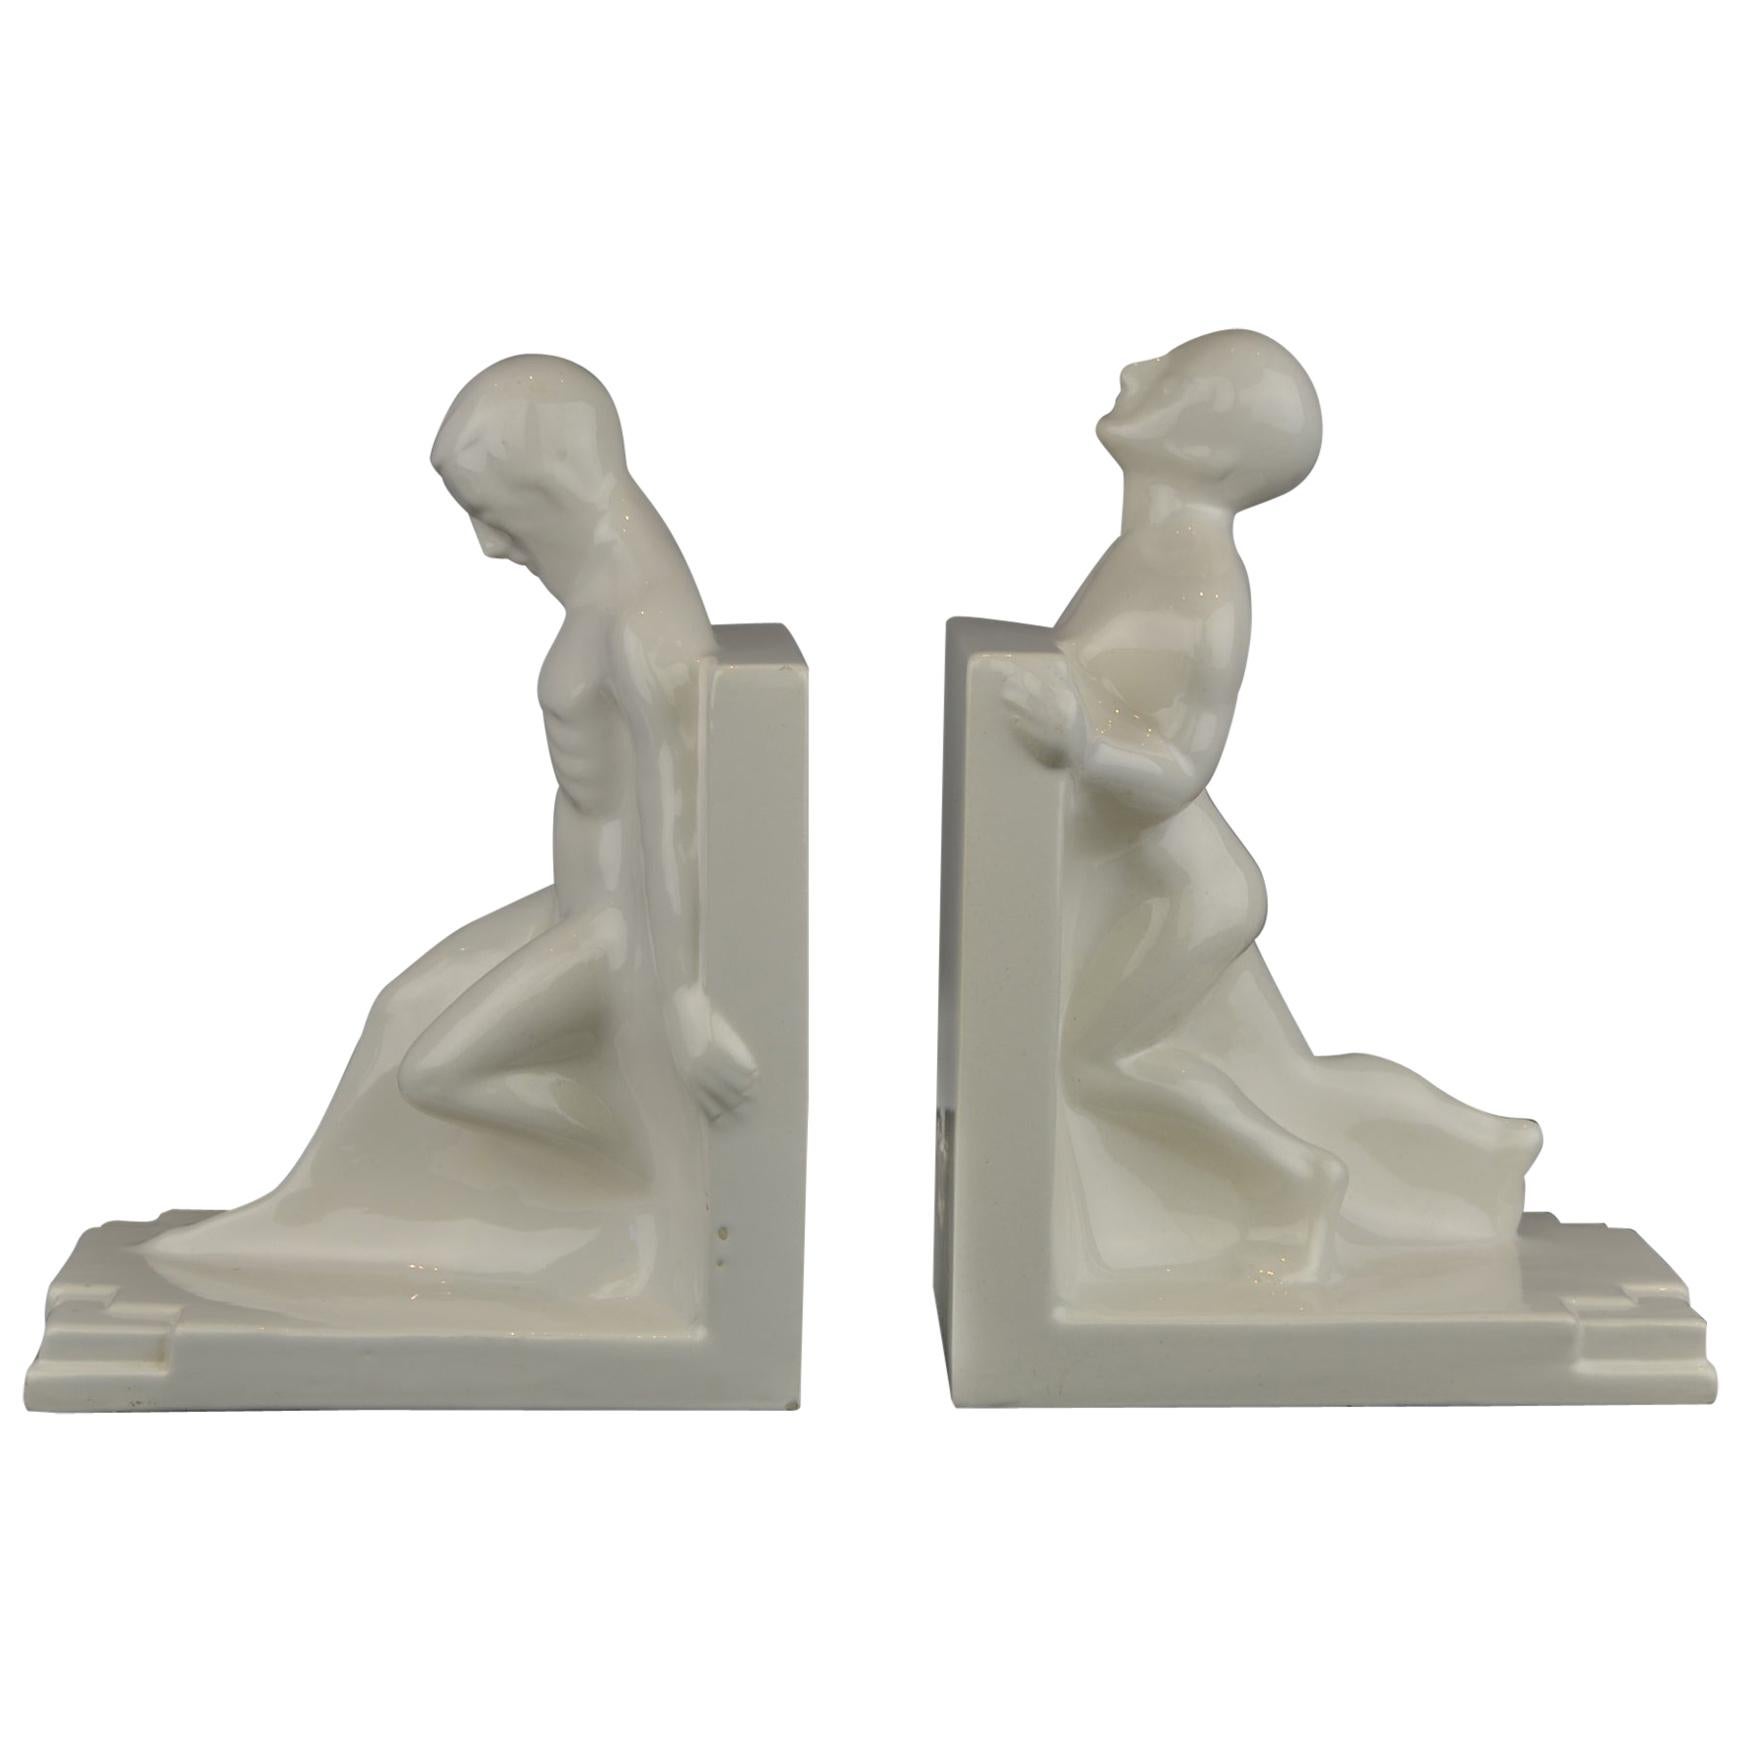 Large Art Deco Bookends with Nude Muscular Males in White Glazed Ceramic